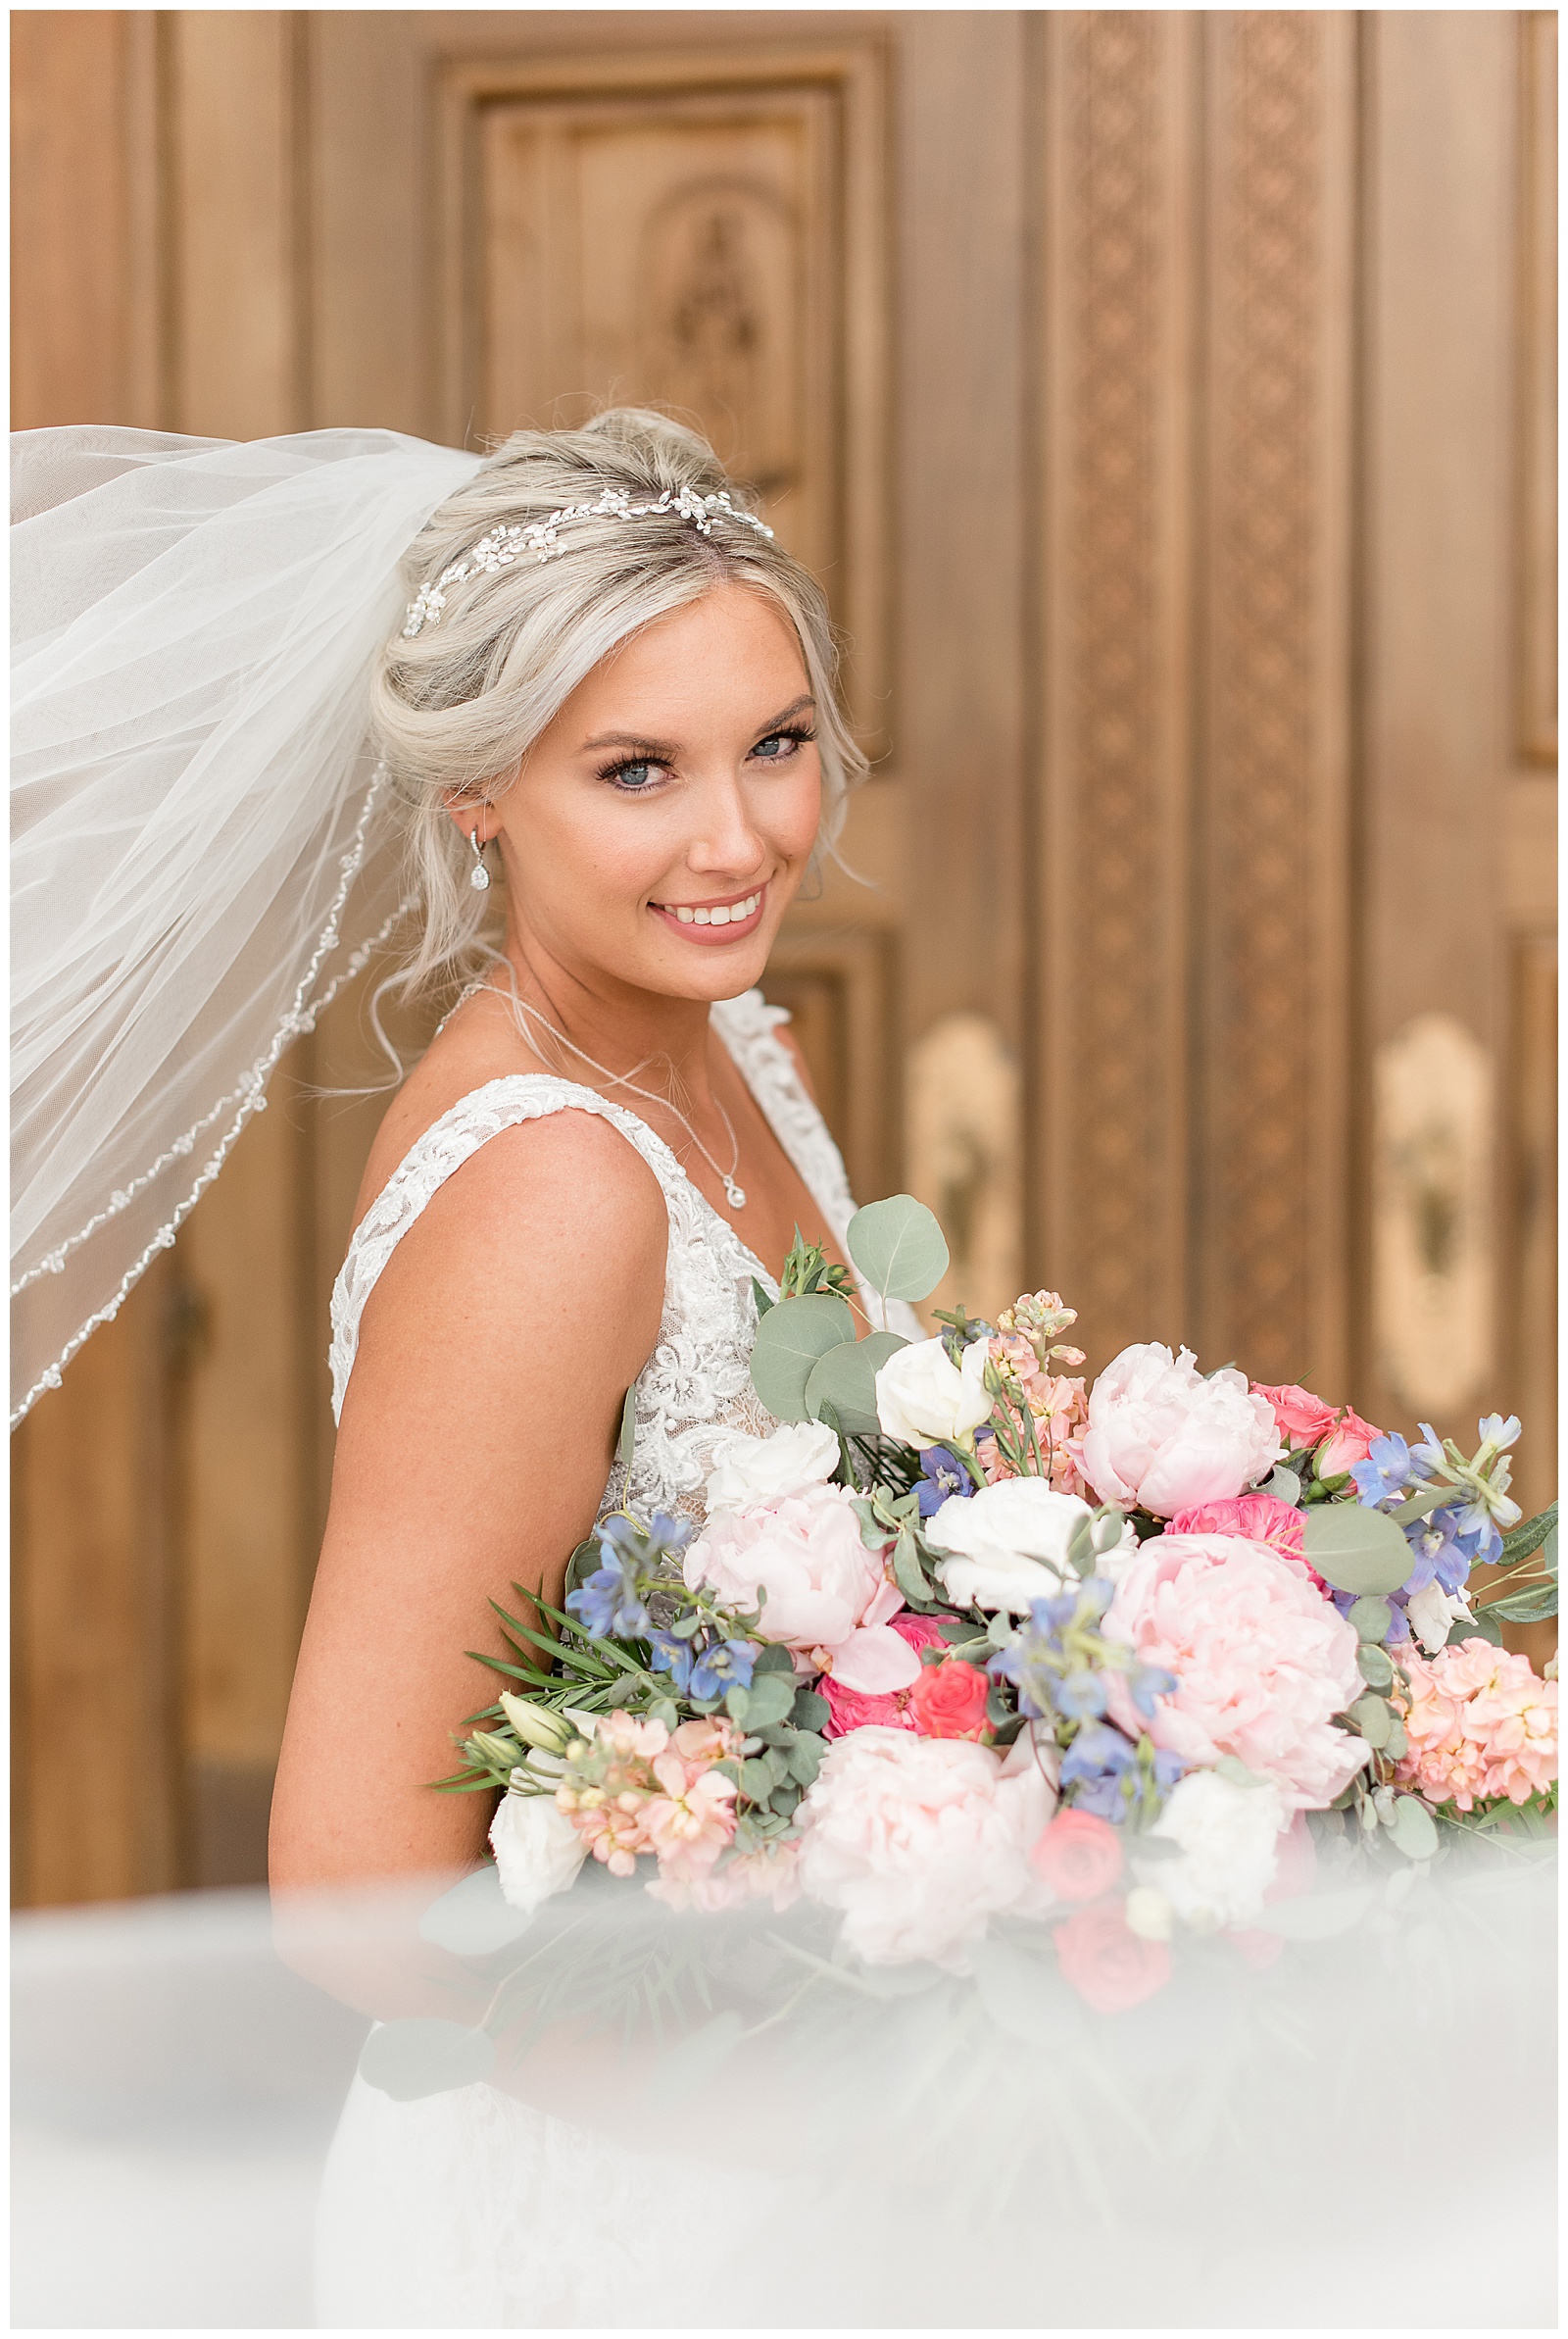 bride smiling at the camera with veil blowing behind her and stunning colorful bouquet displayed in front of her by wooden door